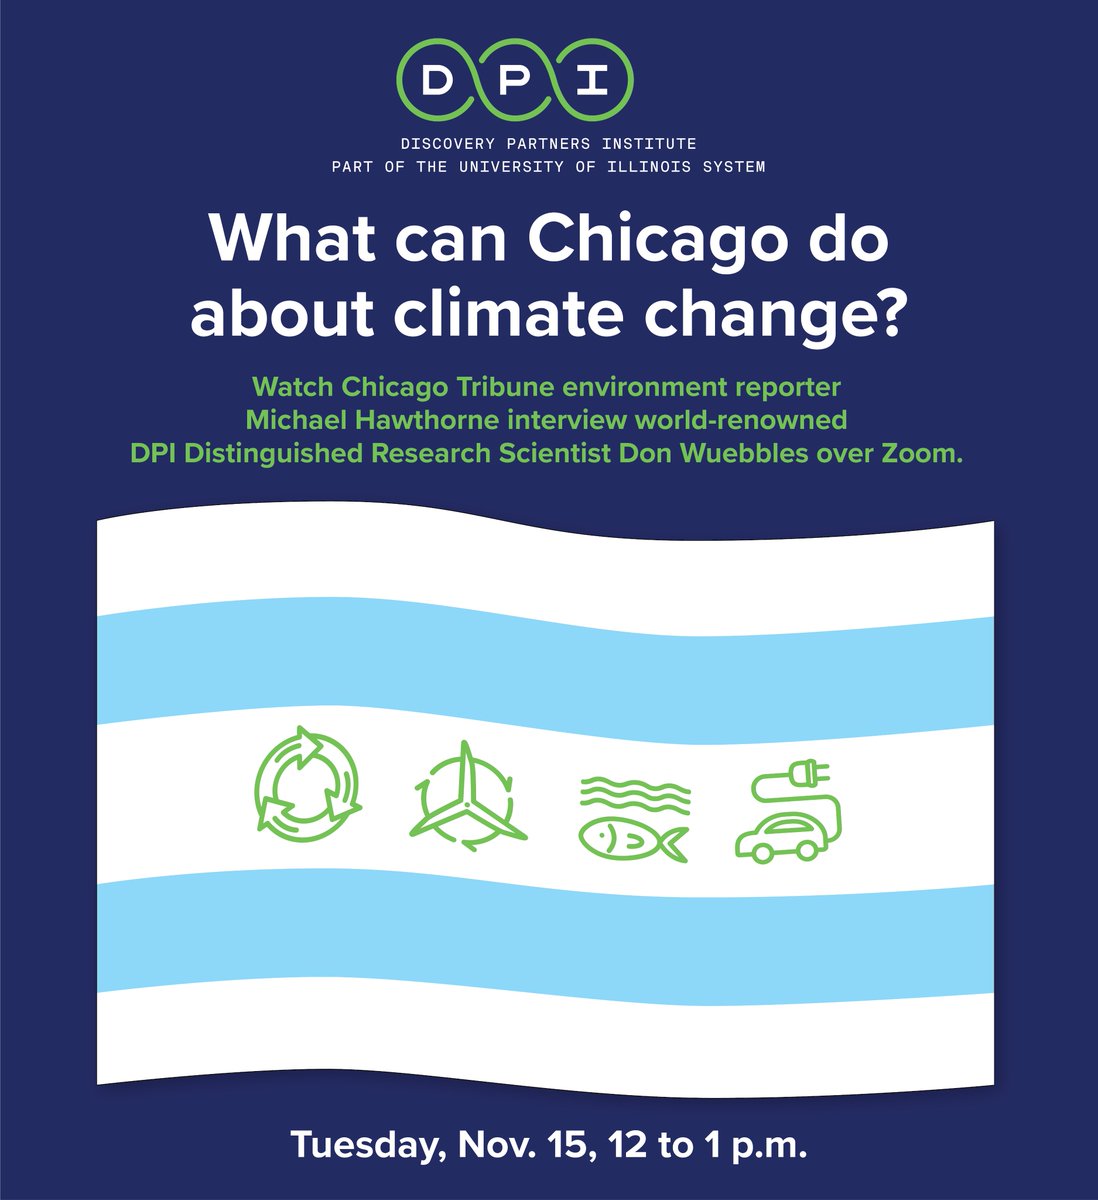 Join us as @ChicagoTribune reporter, Michael Hawthorne @scribeguy moderates a discussion with DPI Distinguished Research Scientist and @ATMS_Illinois professor, Don Wuebbles @Wuebbles! Register today: eventbrite.com/e/what-can-chi… #DiscoverDPI #ClimateChange #Webinar